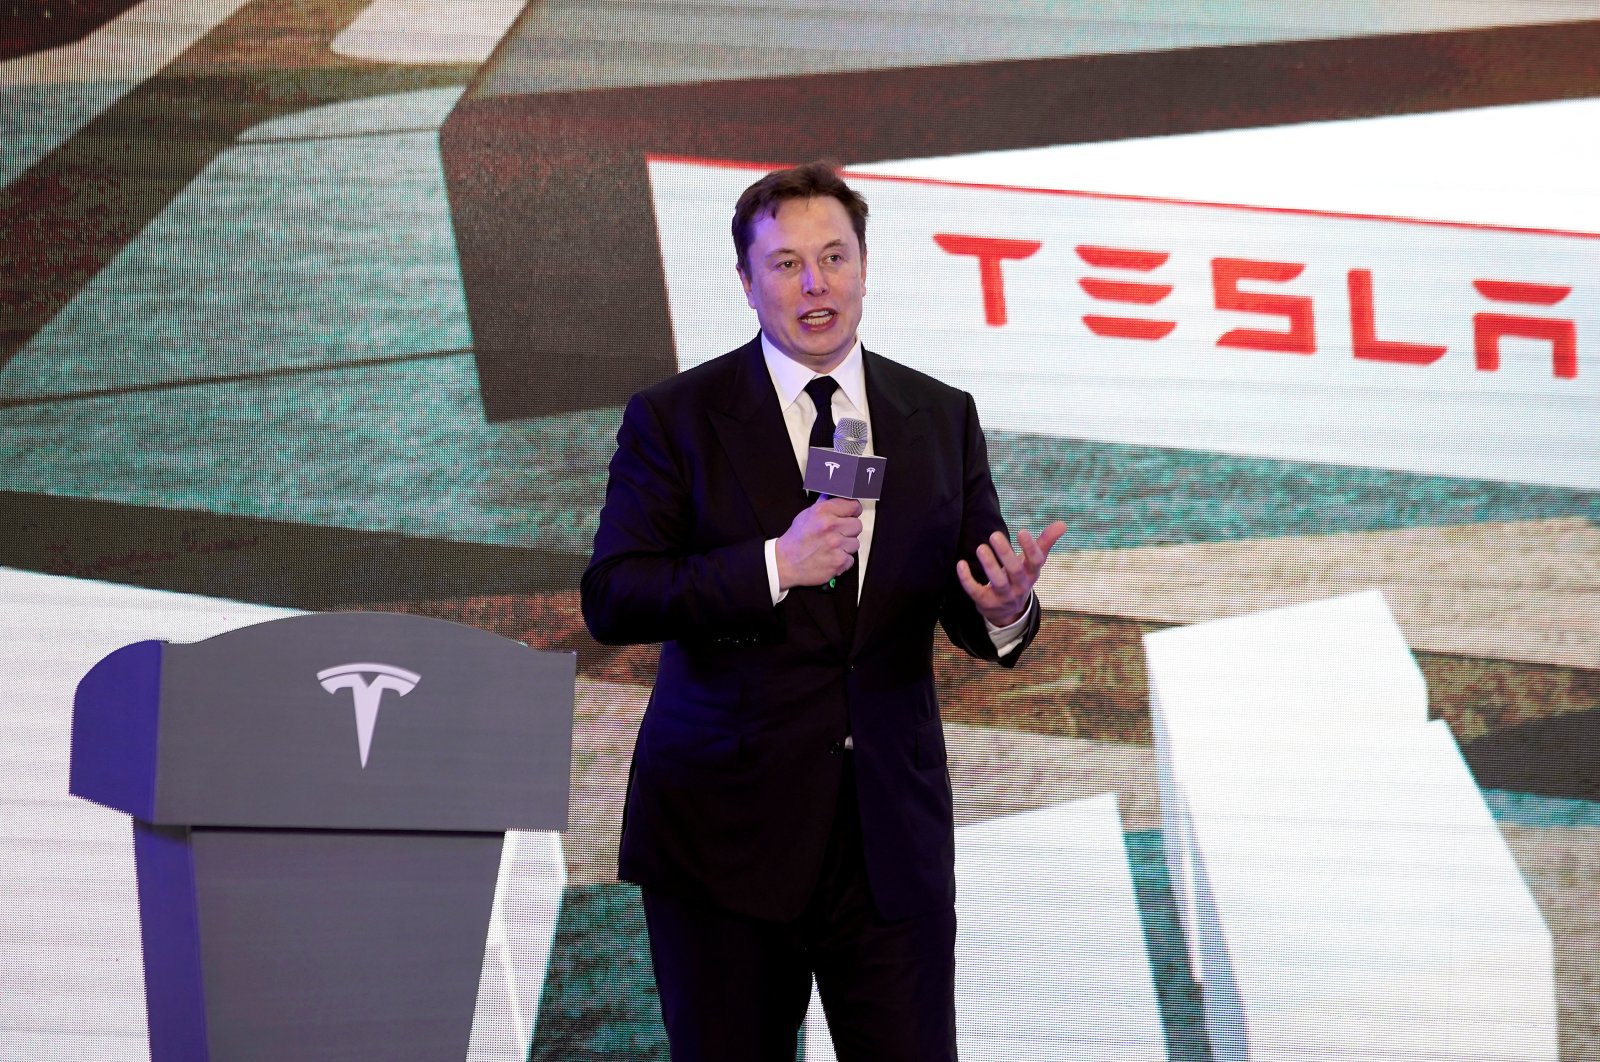 Tesla Inc. CEO Elon Musk speaks at an opening ceremony for the Tesla China-made Model Y program in Shanghai, China, Jan. 7, 2020. (Reuters Photo)